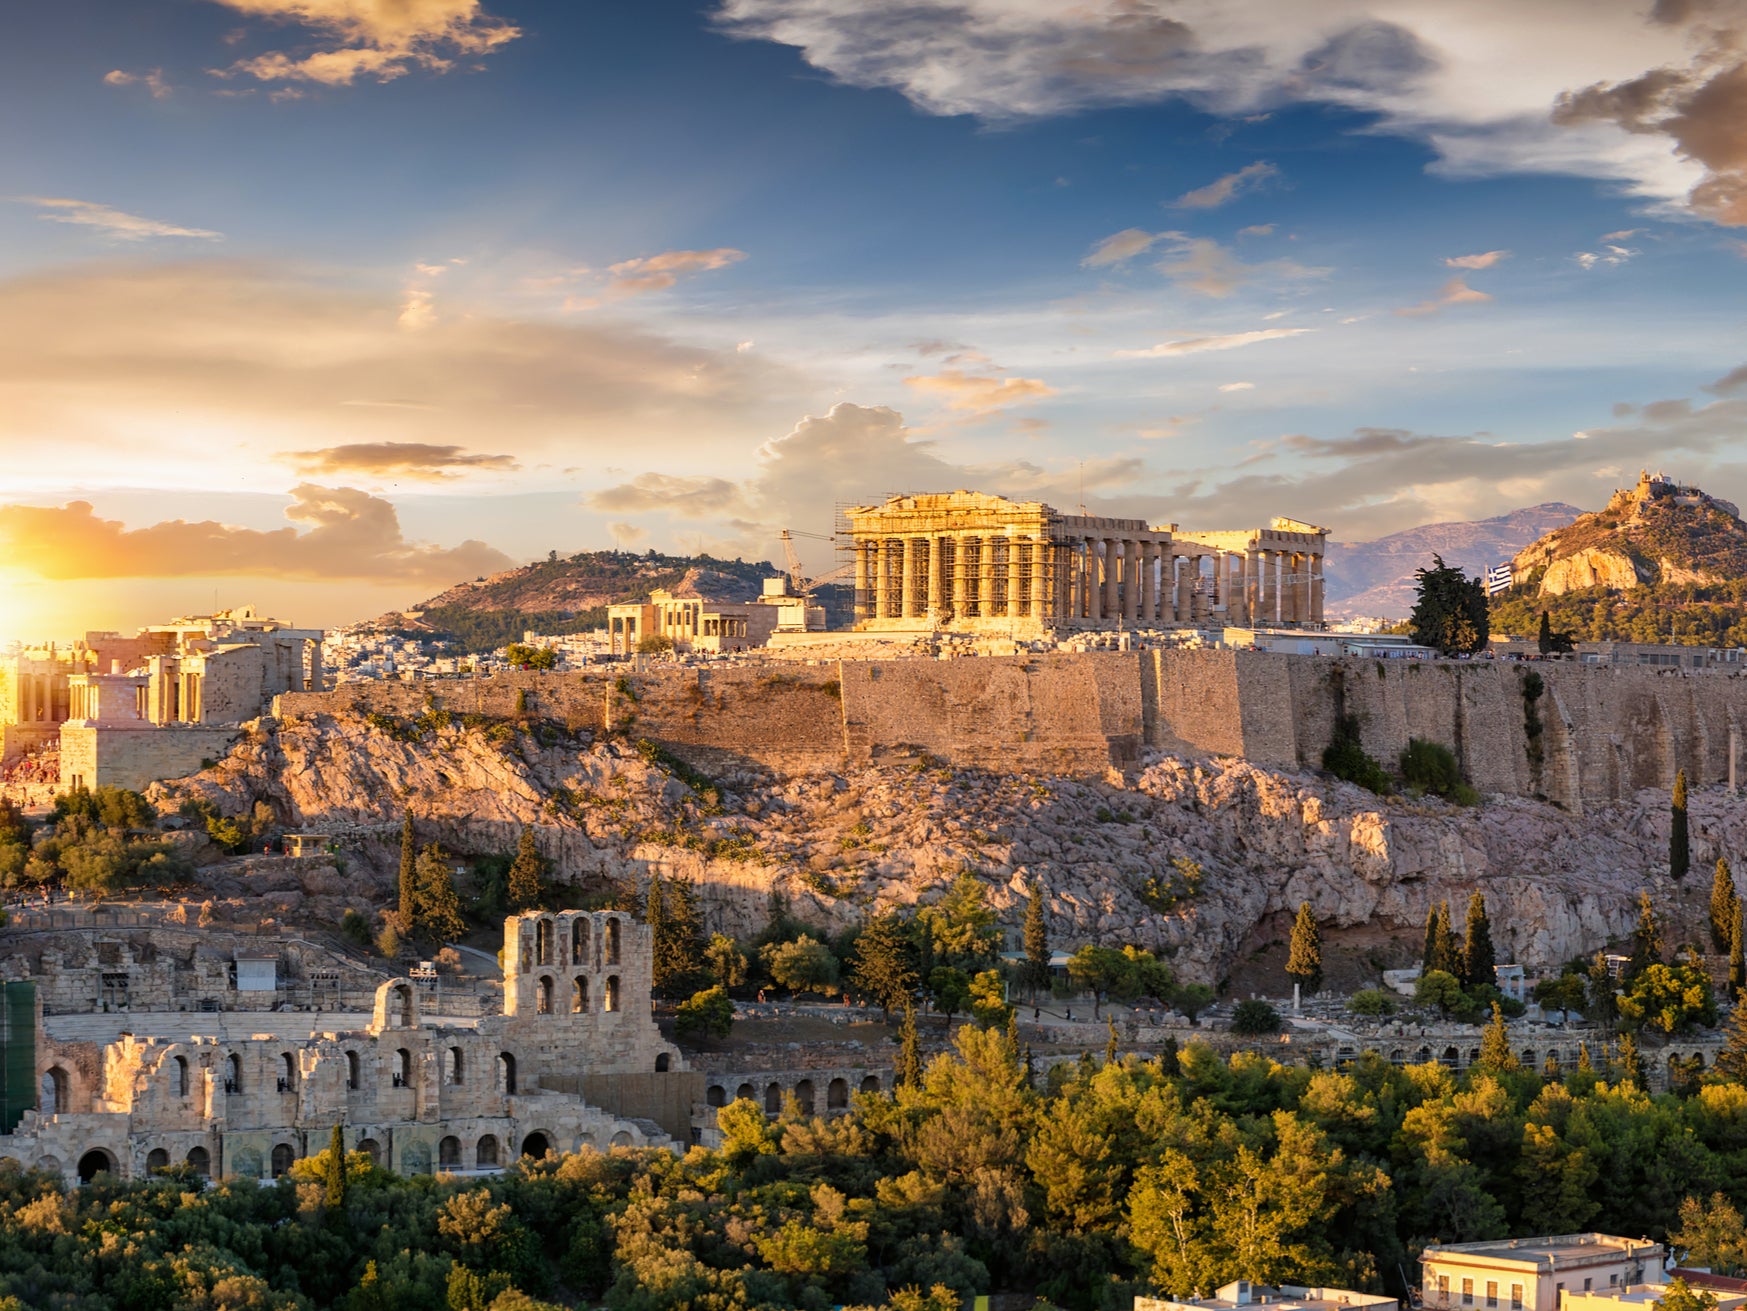 Athens’ ancient landmarks draw in millions of tourists each year